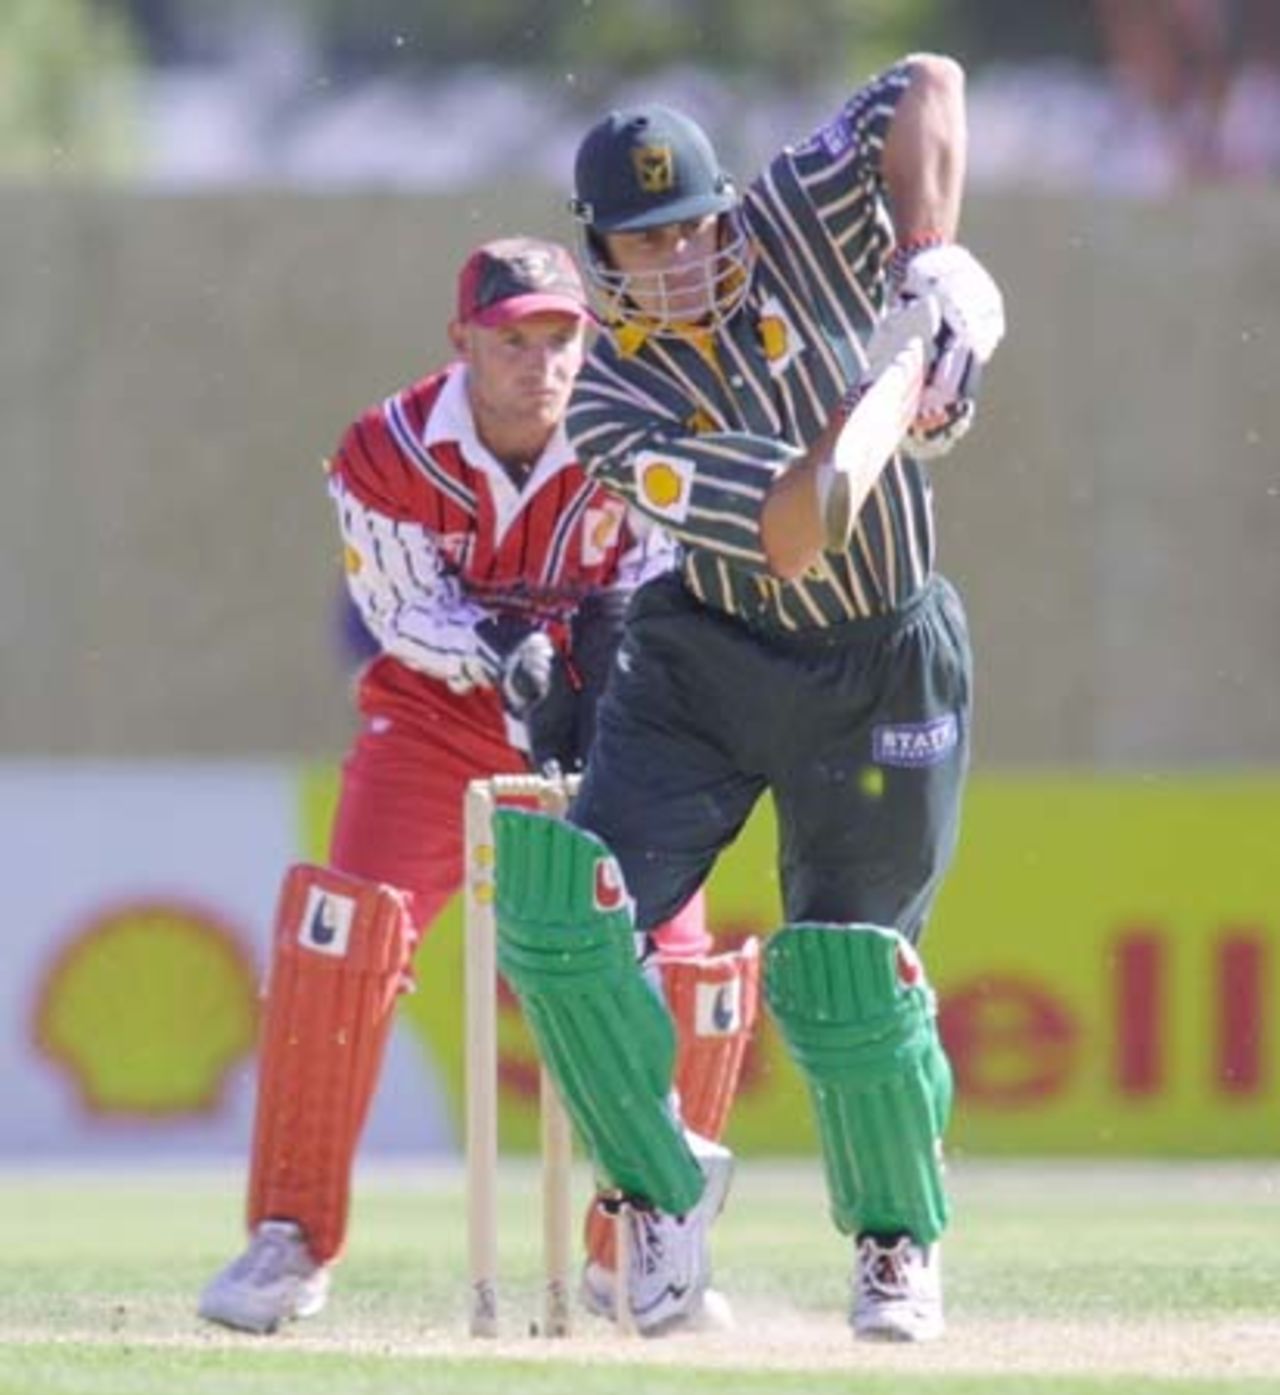 Central Districts batsman Craig Spearman works a short ball off his hip through midwicket during his innings of 71 not out as Canterbury wicket-keeper Gareth Hopkins looks on. 3rd Shell Cup Final: Canterbury v Central Districts at Jade Stadium, Christchurch, 28 January 2001.